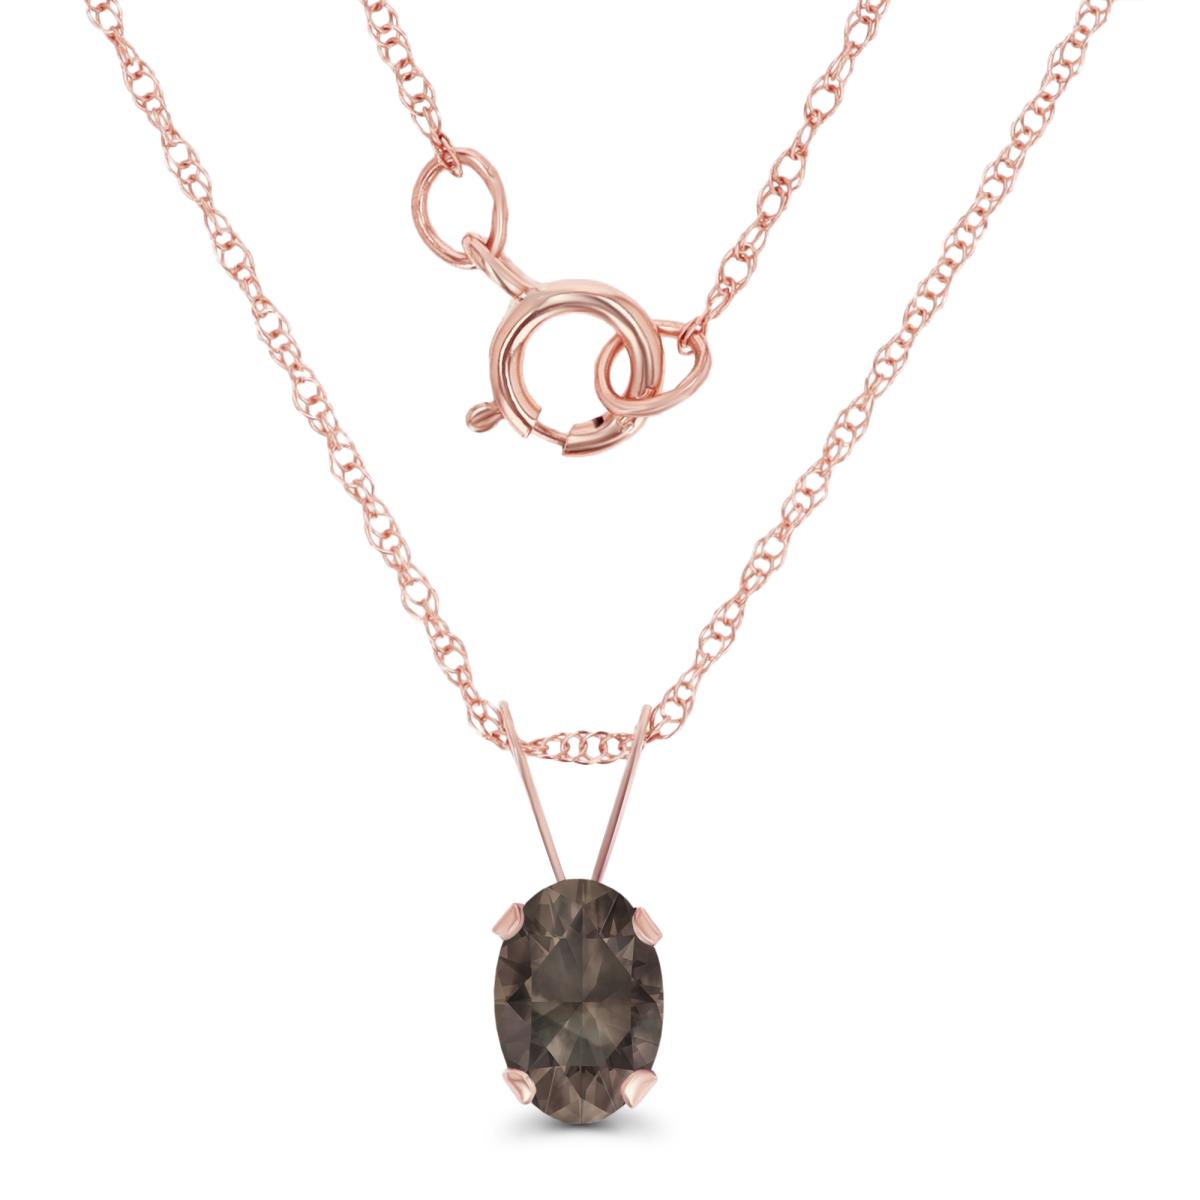 10K Rose Gold 6x4mm Oval Smokey Quartz 18" Rope Chain Necklace